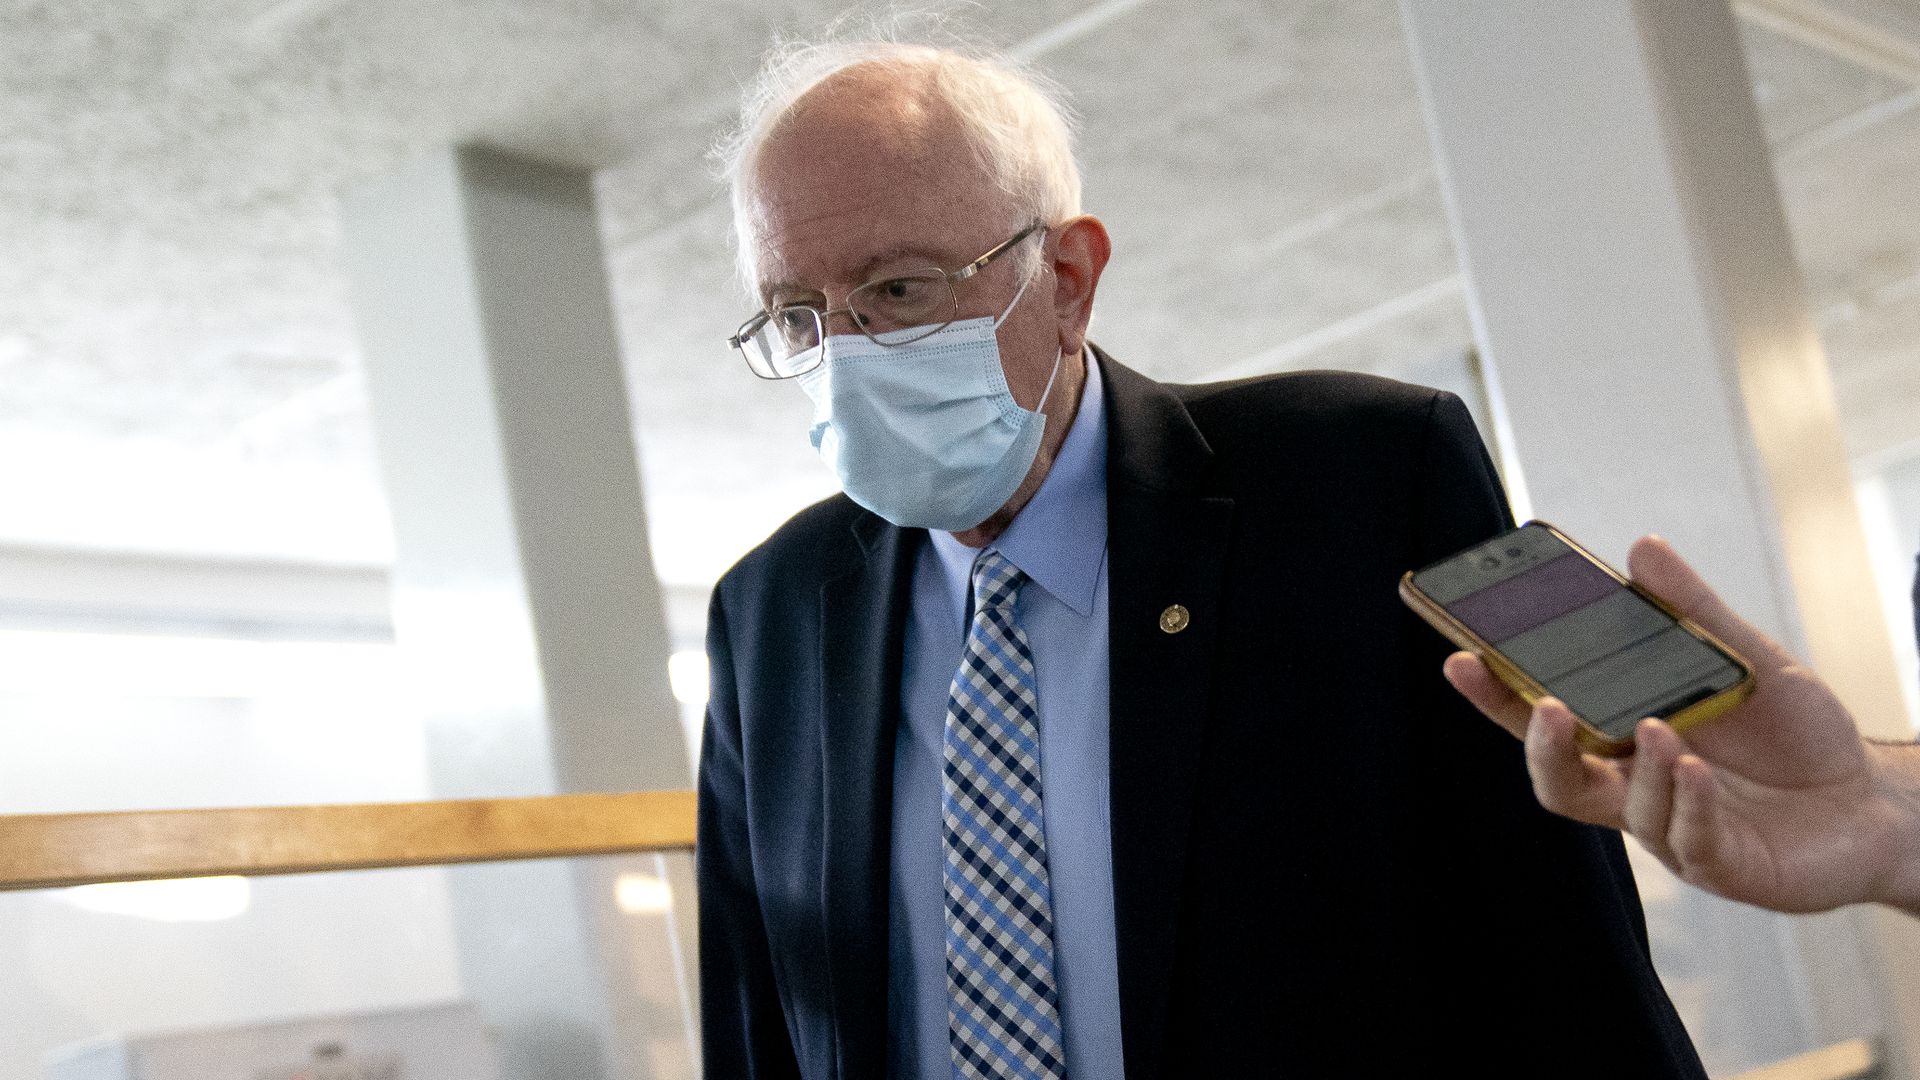 Bernie Sanders wears a suit and tie while someone holds a phone up to him. 